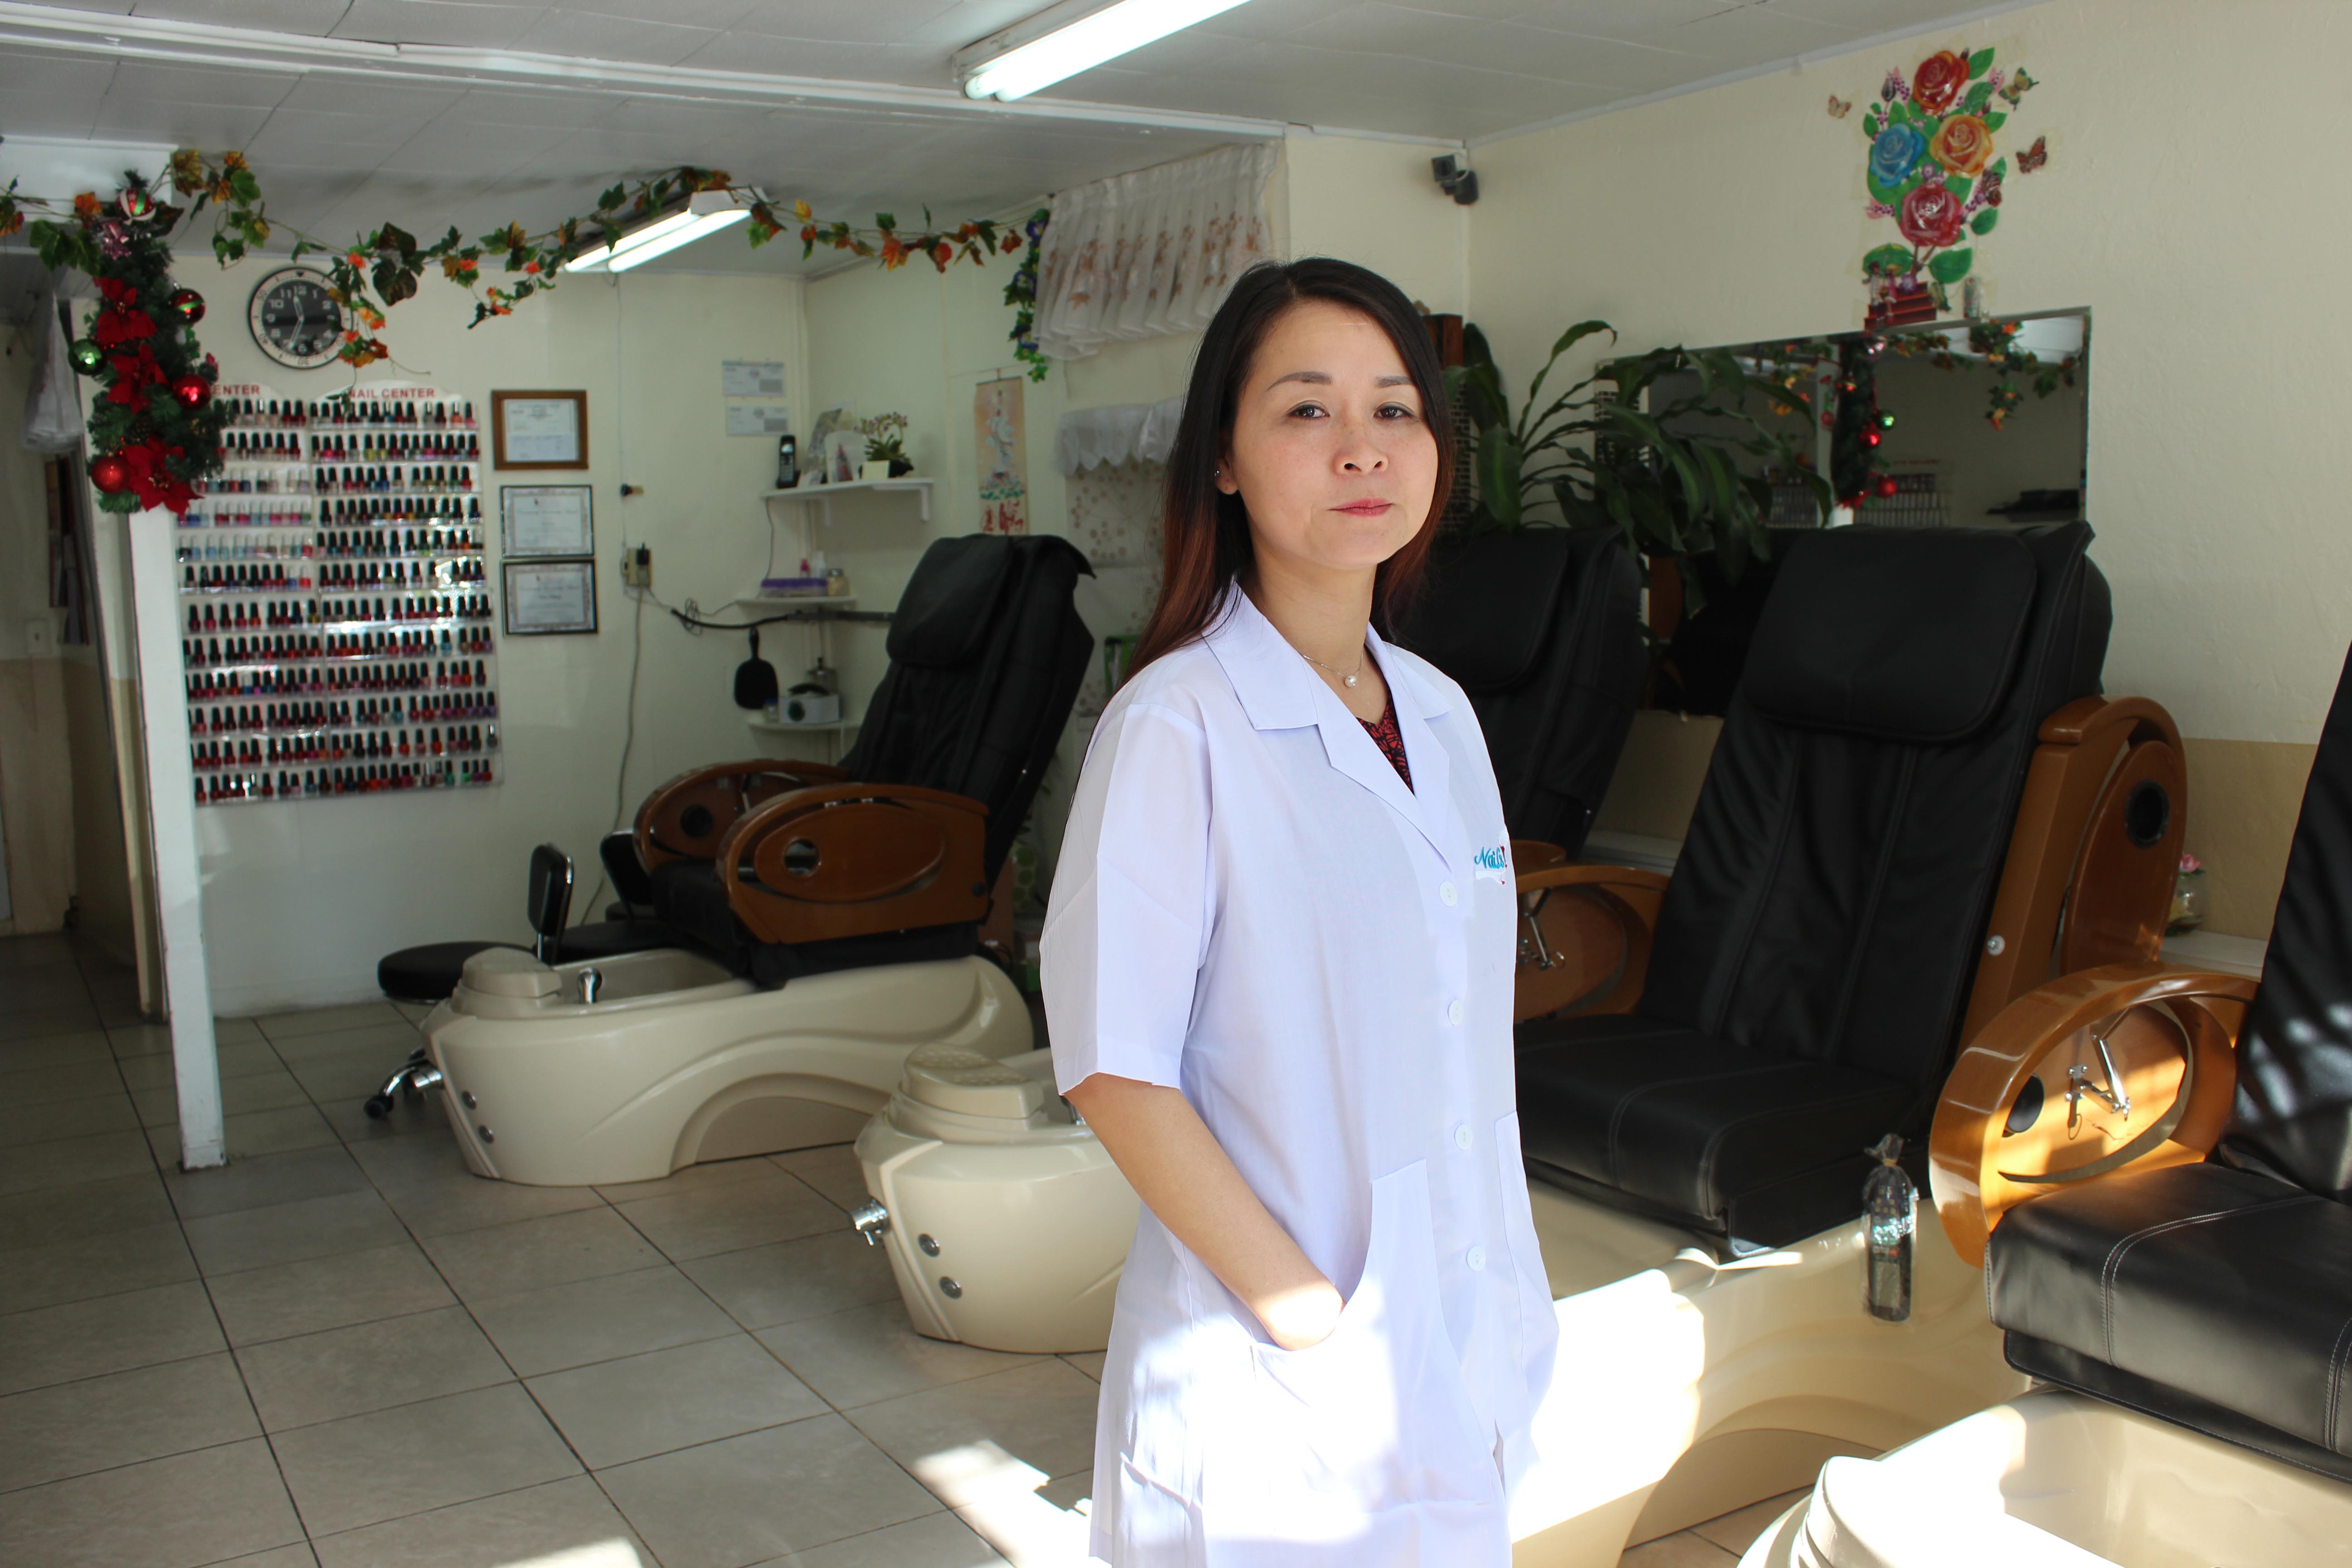 Mai Dang’s Fashion Nails has been certified as a healthy salon since 2013. Salons with that designation provide proper ventilation, train employees on best practices, and avoid products containing formaldehyde, toluene and other particularly toxic solvents and glues. (Jenny Gold/KHN)